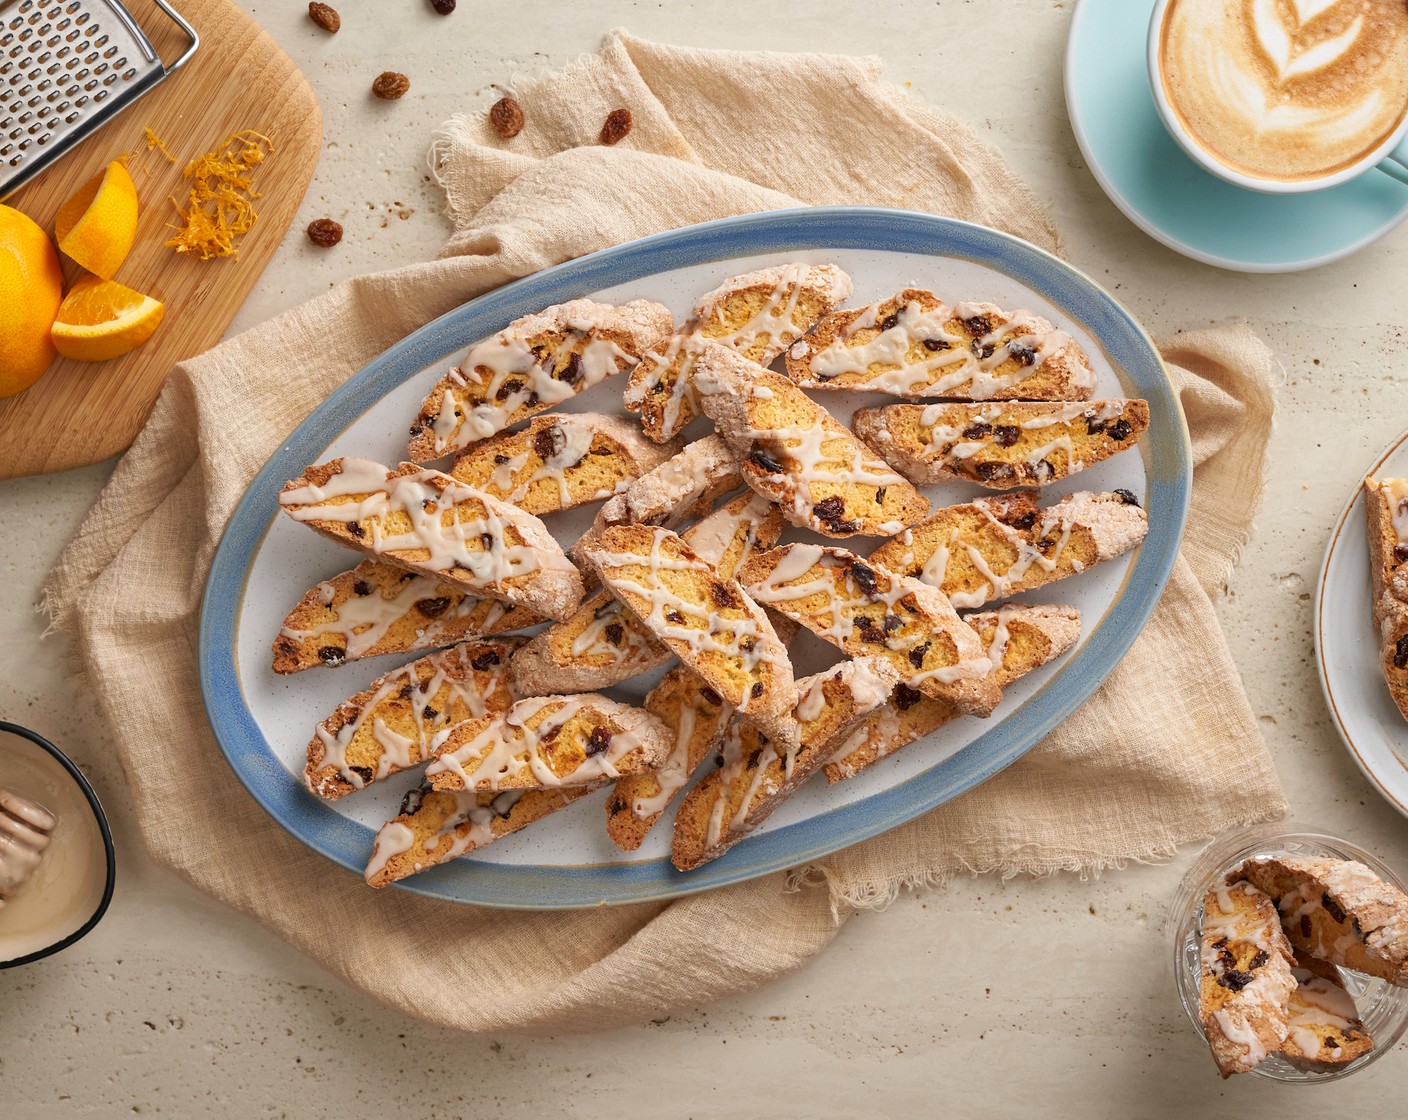 step 12 Now, dip and savor these delightful biscotti alongside your favorite cup of coffee. Enjoy!